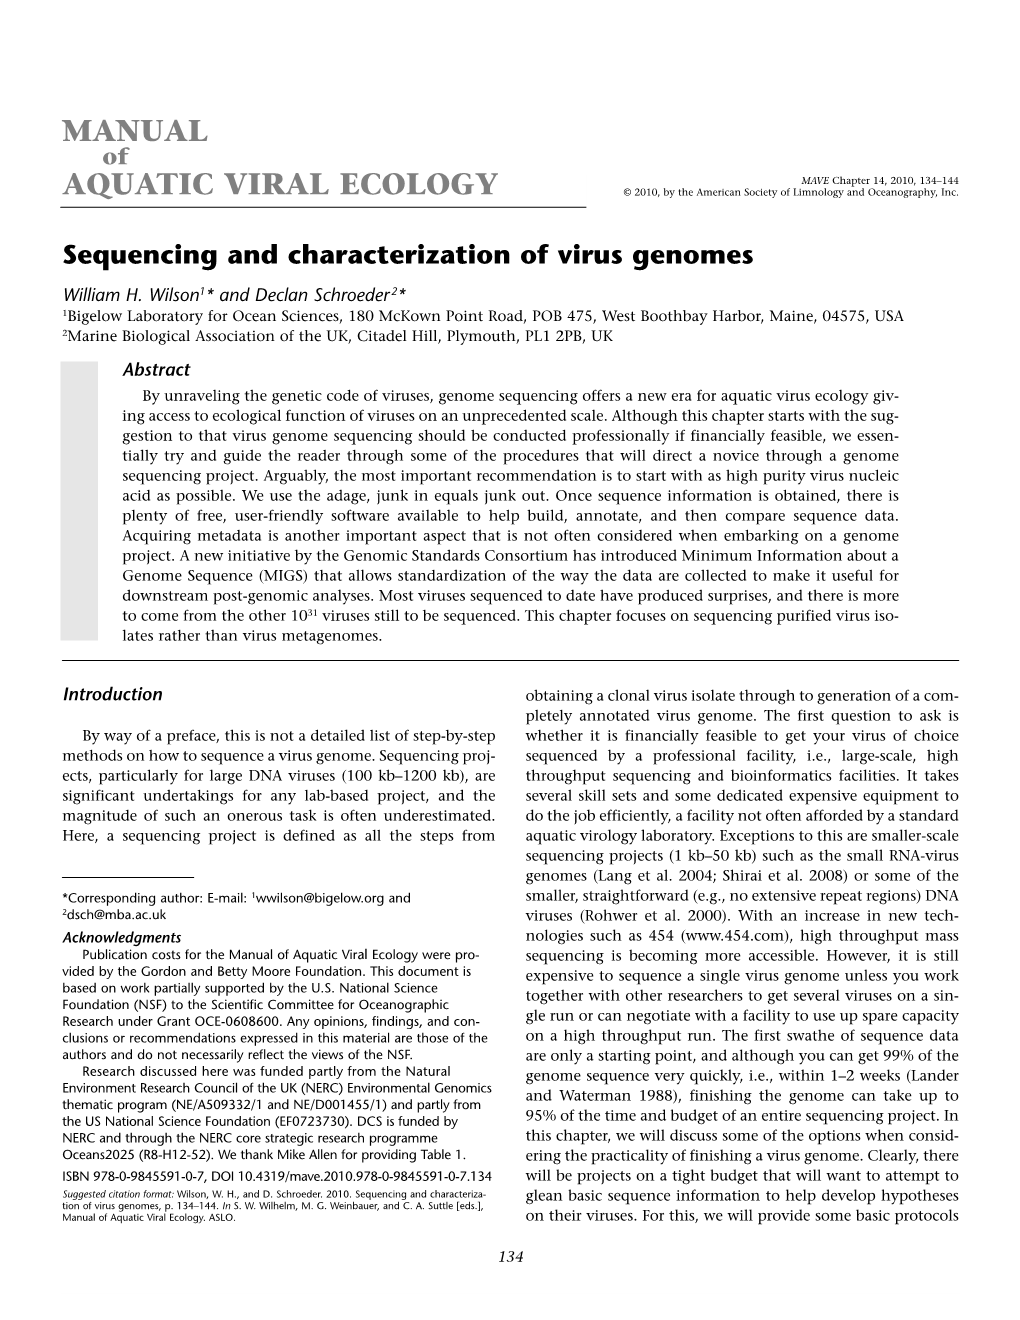 William H. Wilson and Declan Schroeder. Sequencing and Characterization of Virus Genomes. MAVE Chapter 14, 2010, 134-144